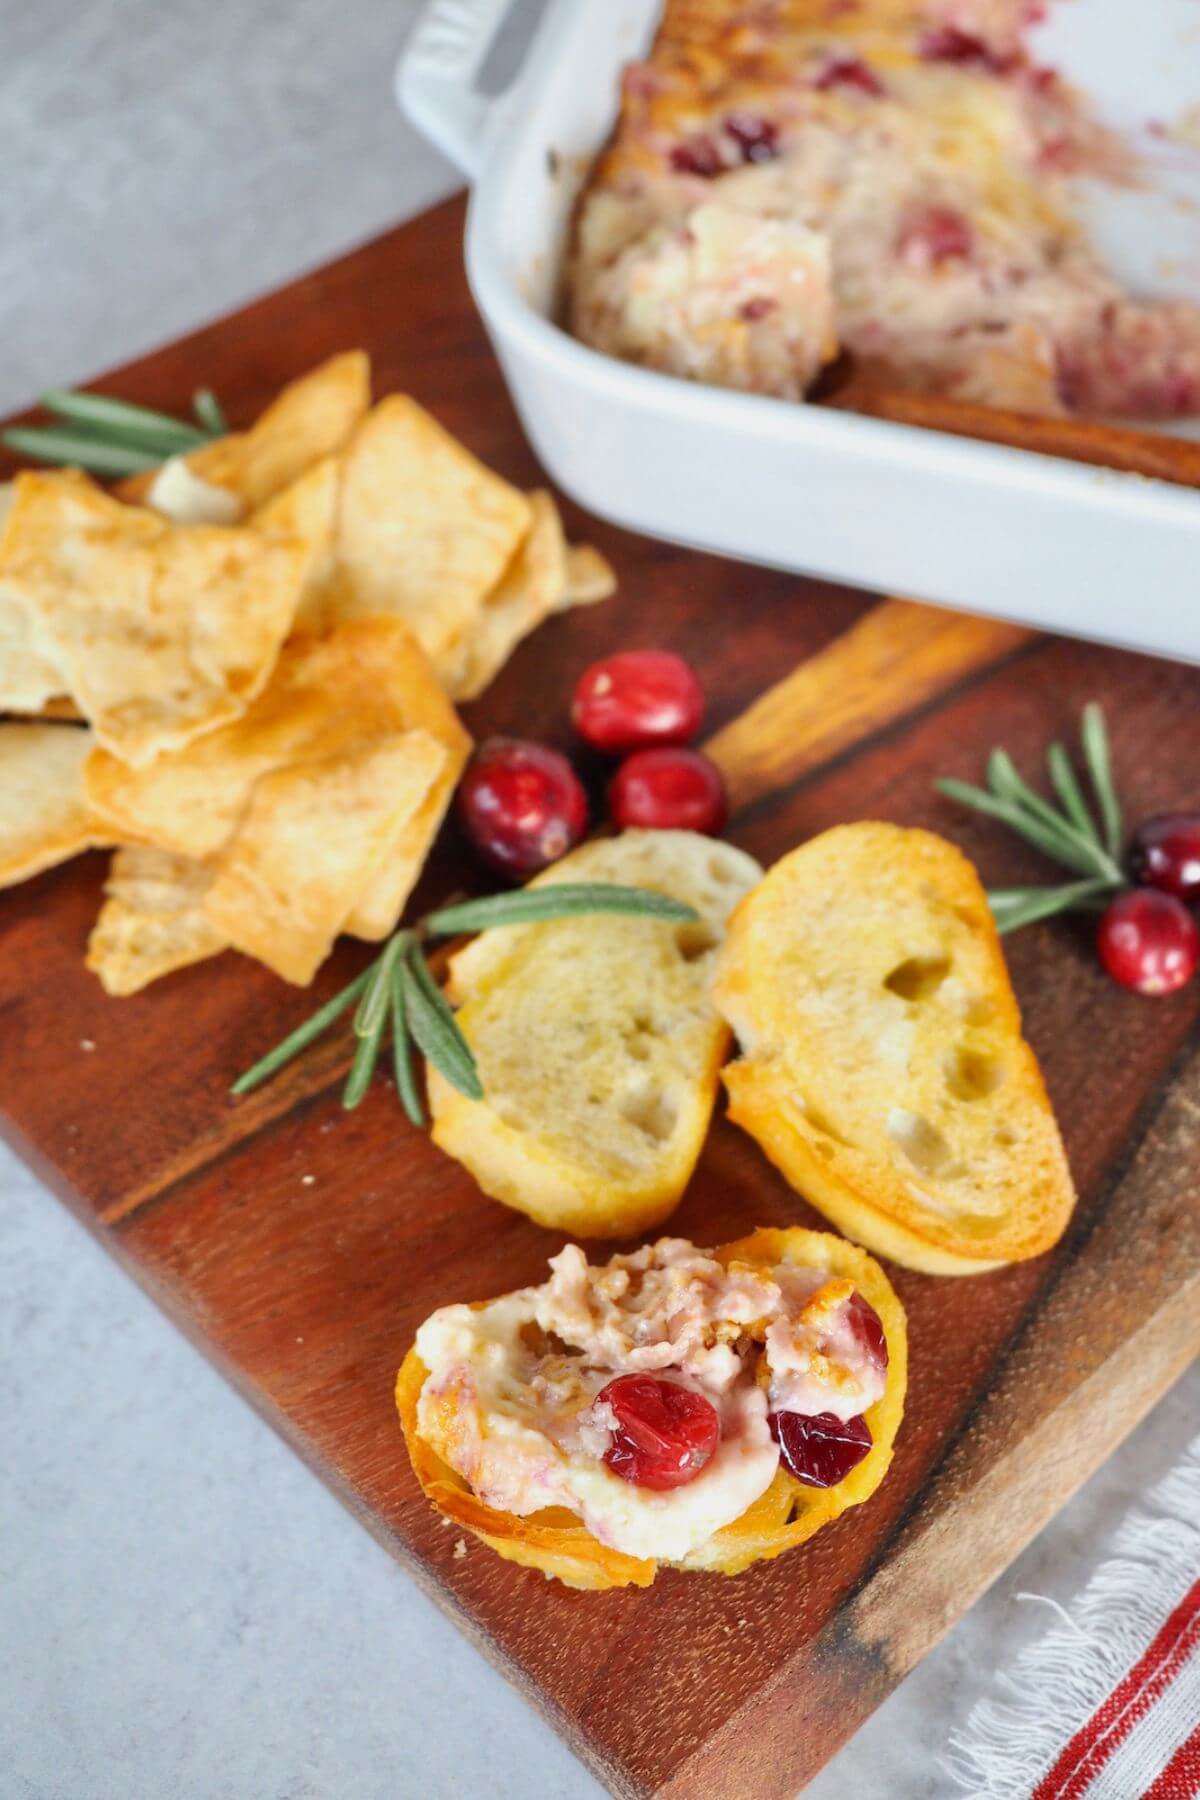 Cranberry cream cheese dip smeared on crostini next to fresh herbs and cranberries.